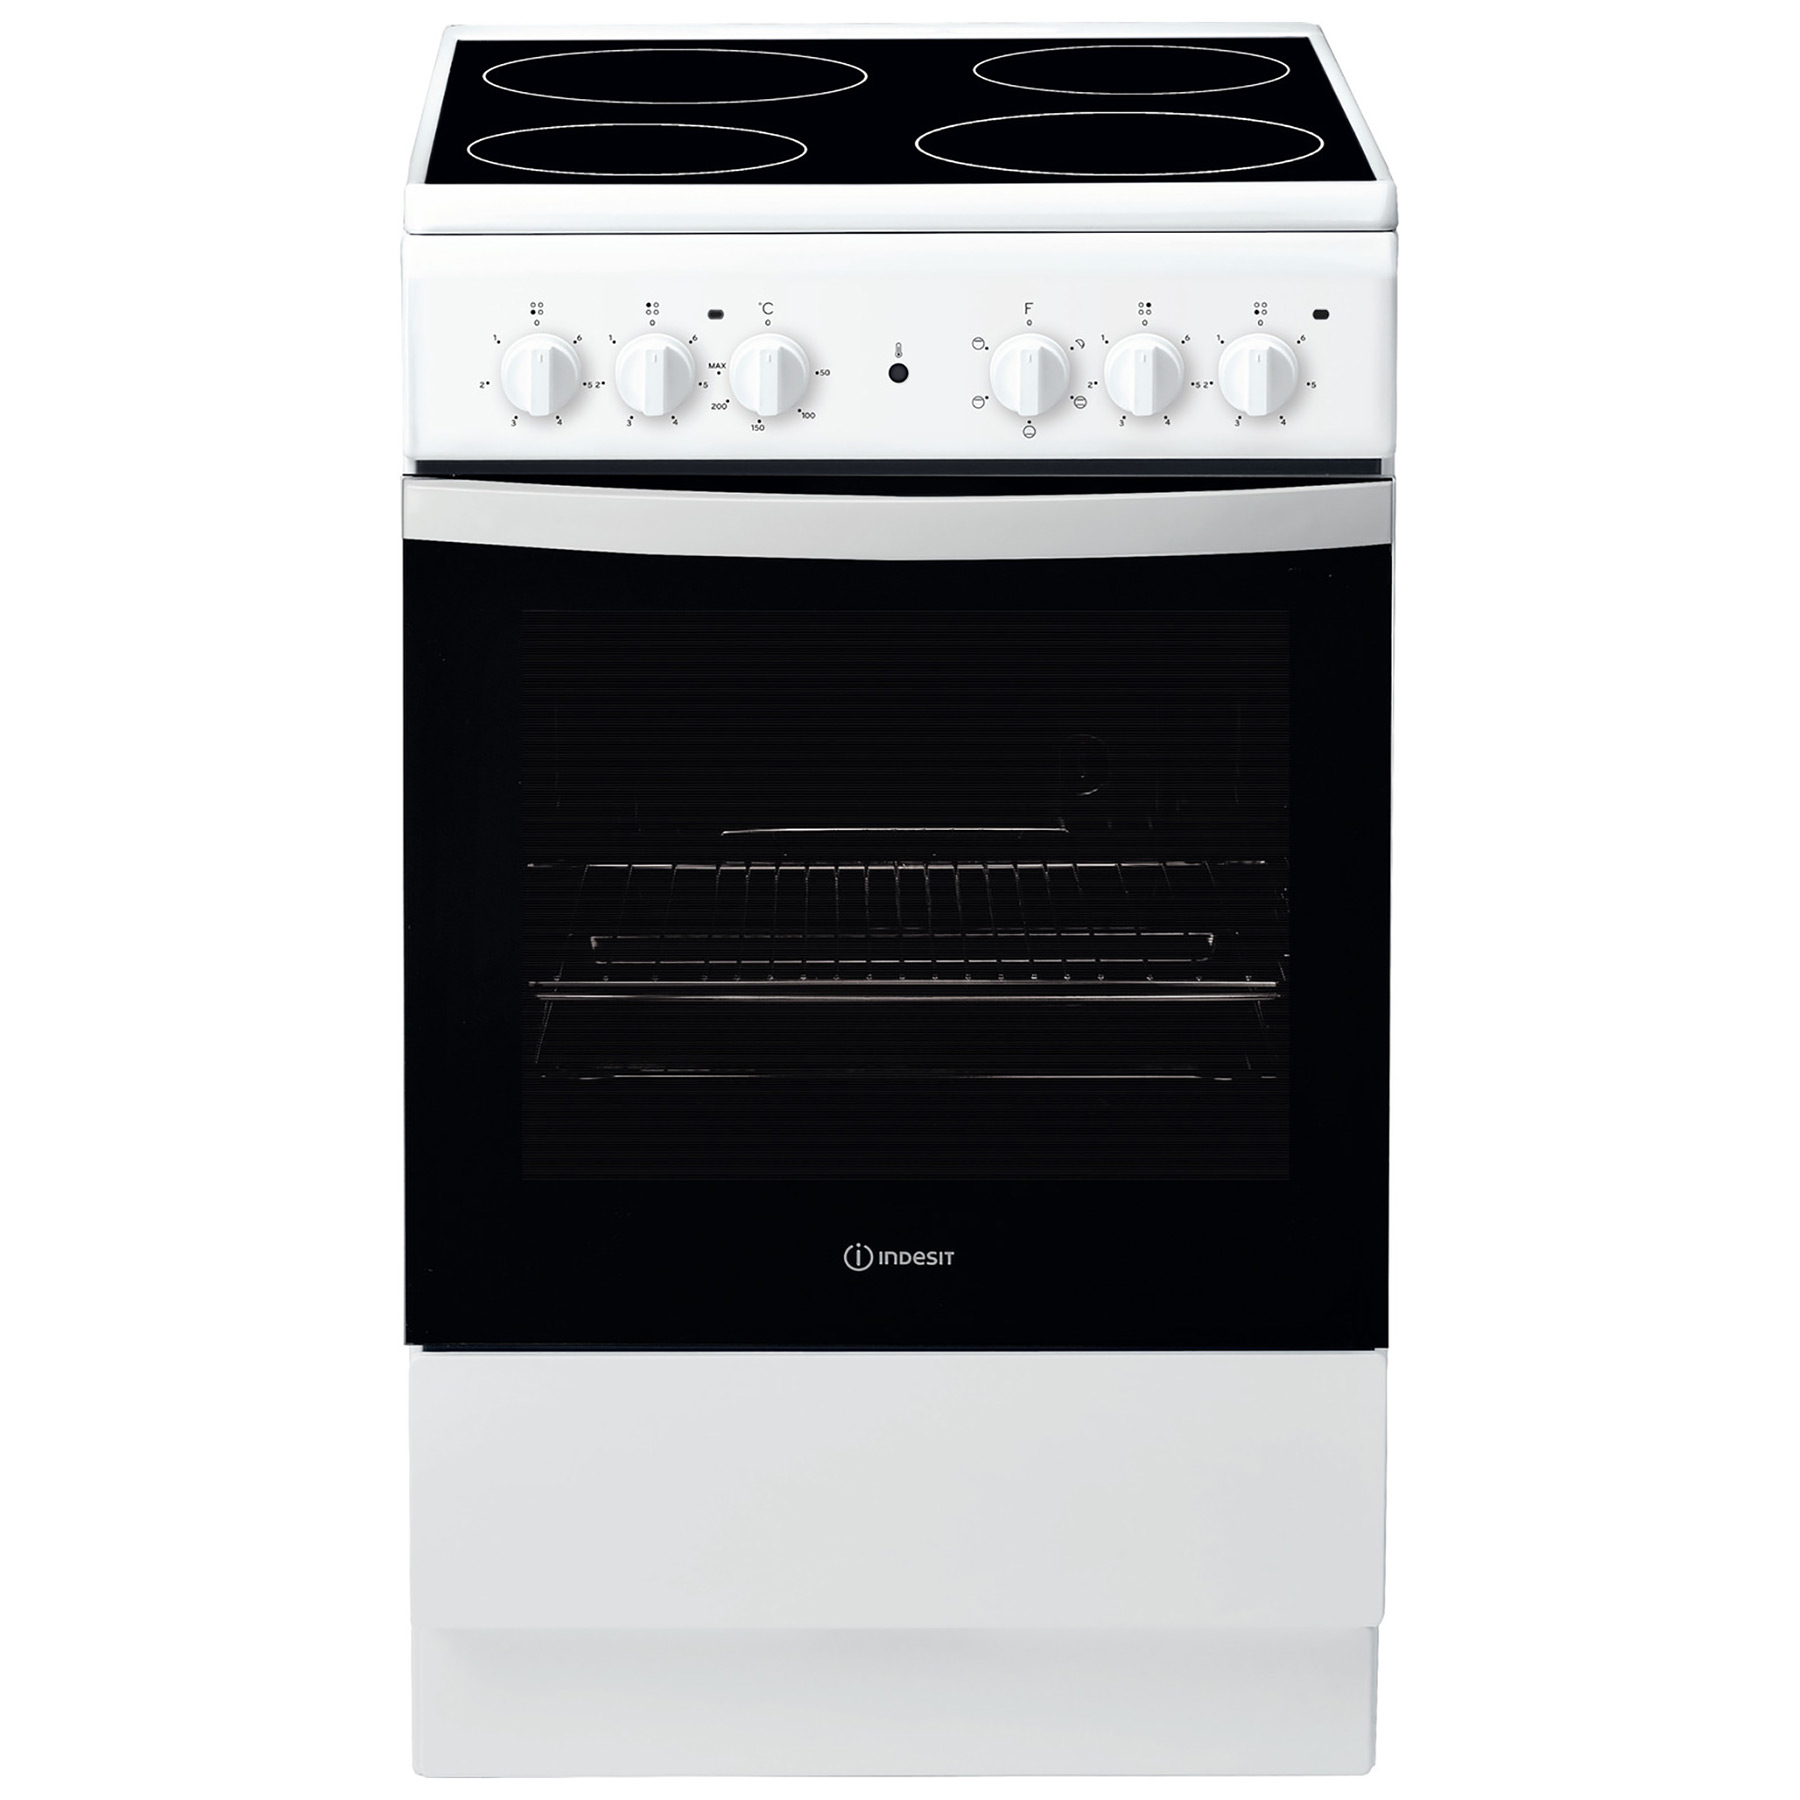 Image of Indesit IS5V4KHW 50cm Single Oven Electric Cooker in White Ceramic Hob